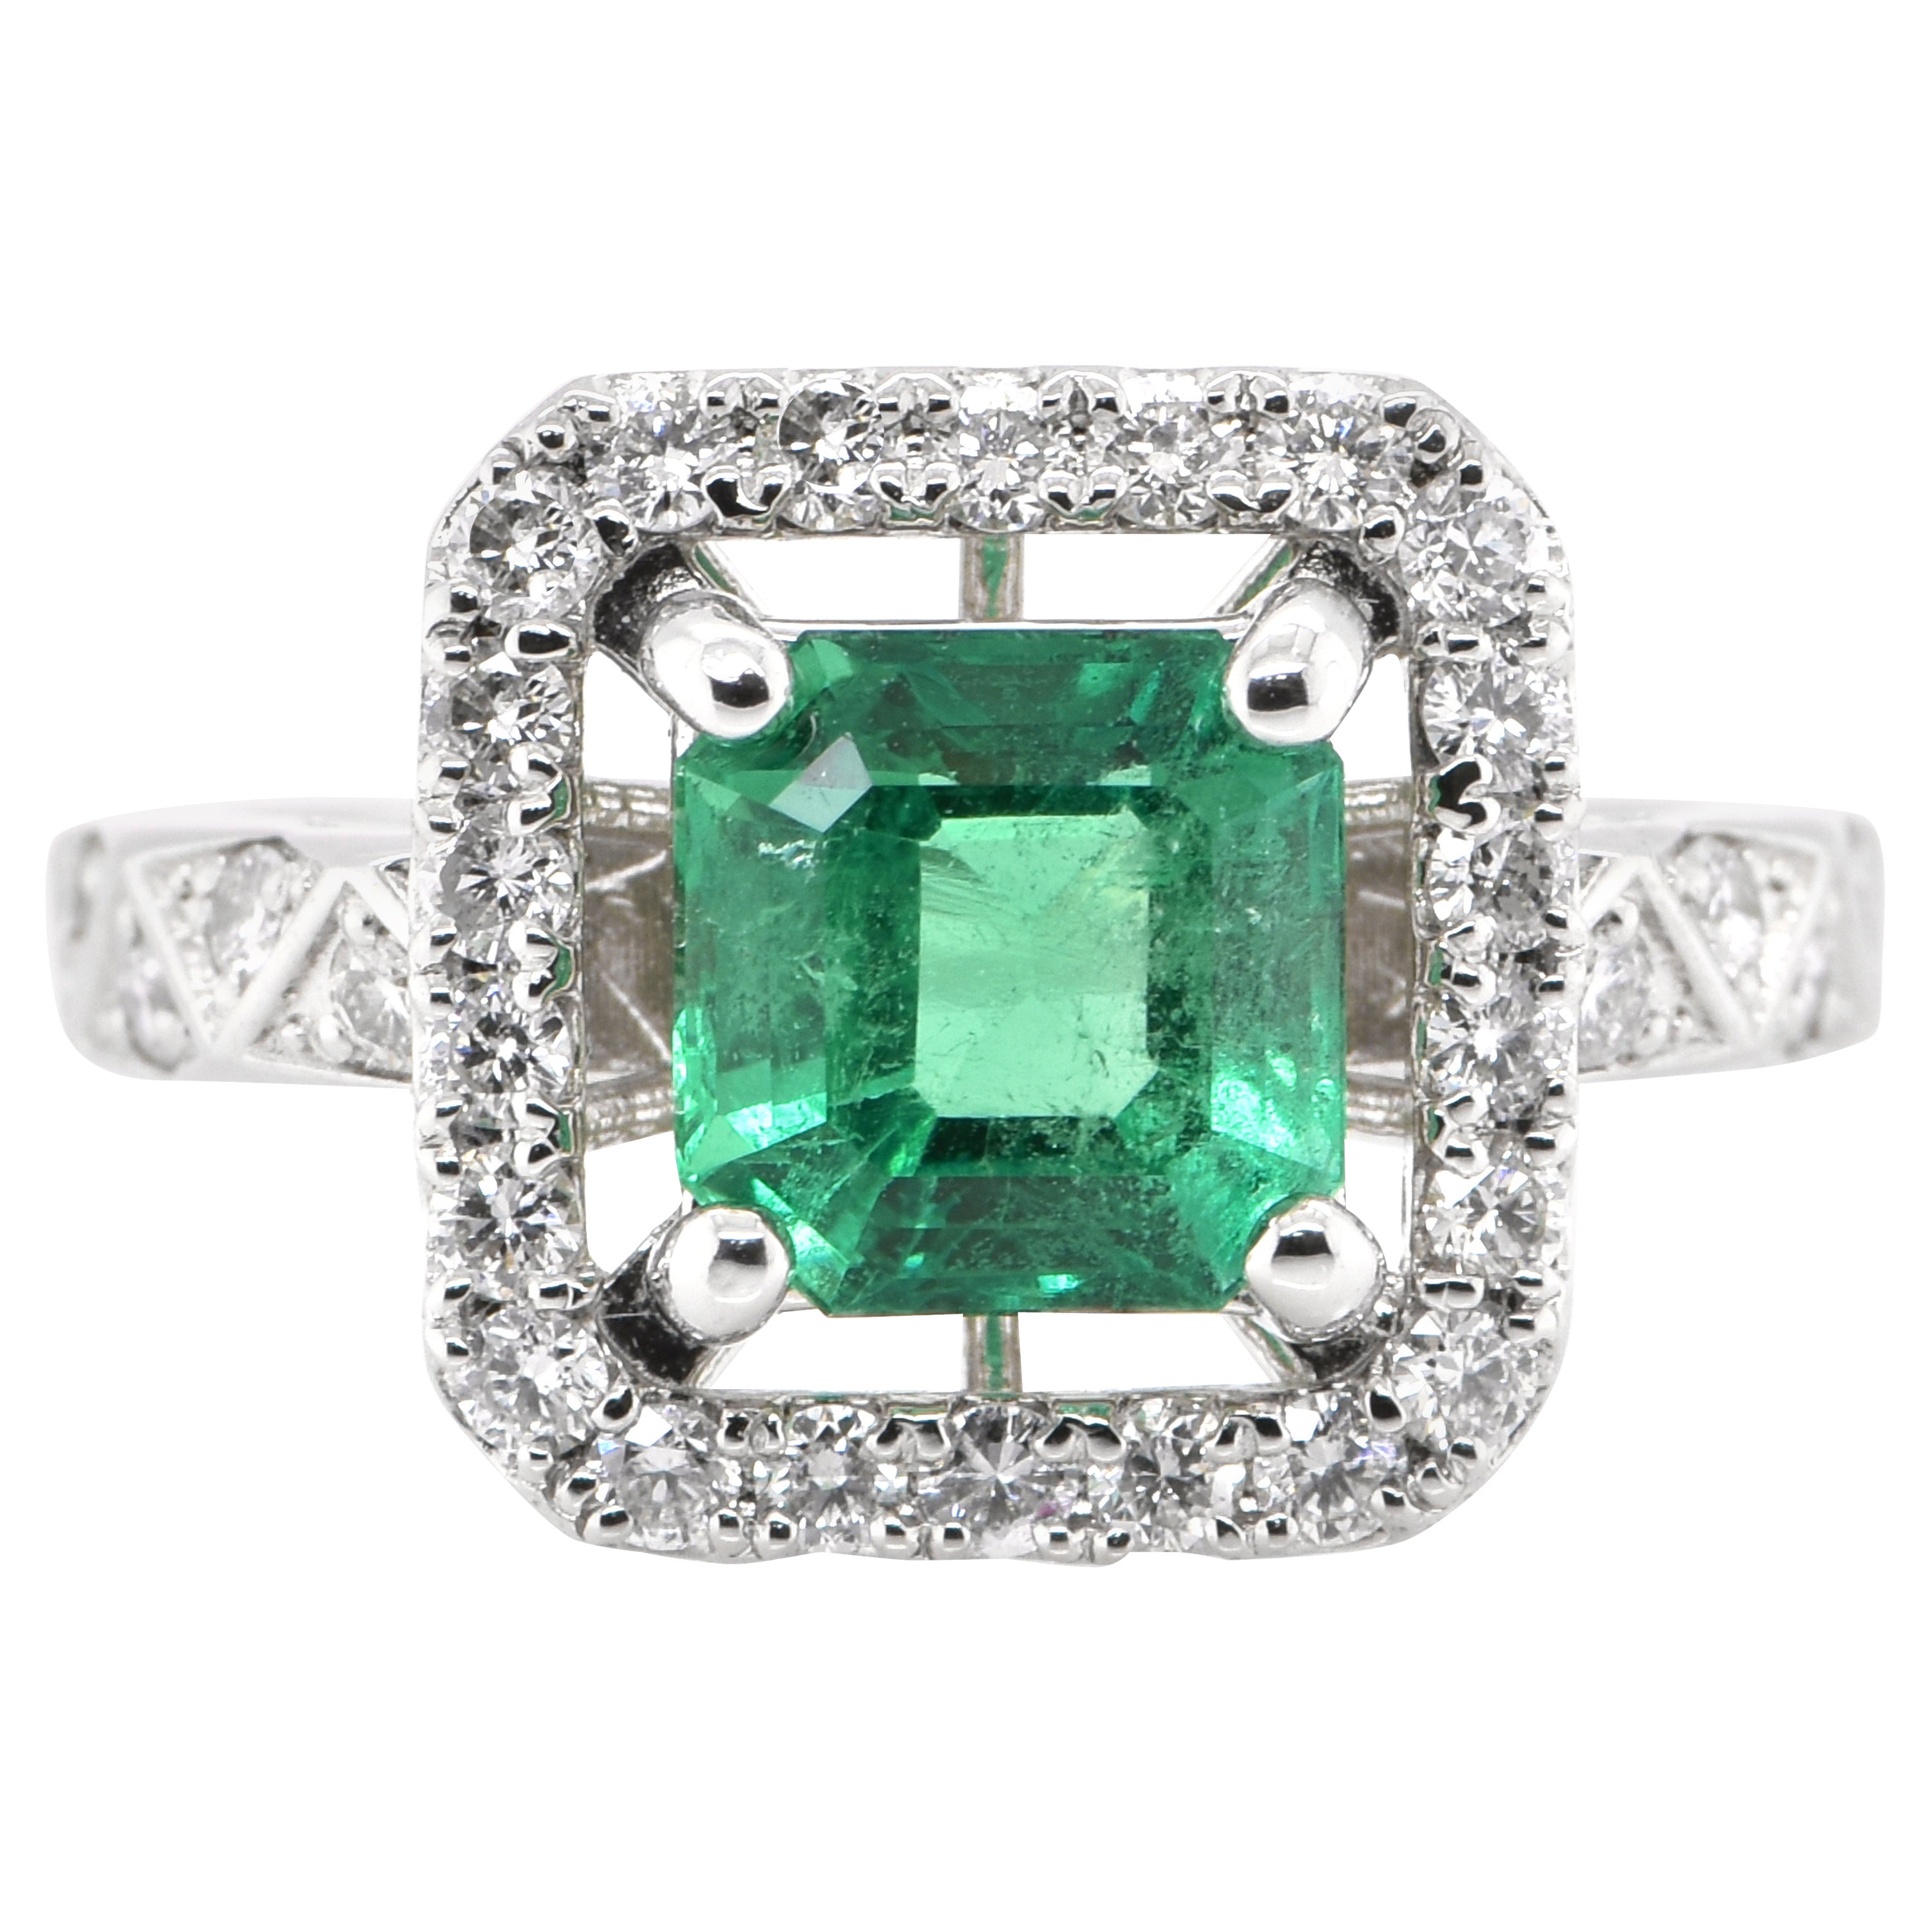 1.69 Carat Natural Emerald and Diamond Ring Set in Platinum For Sale